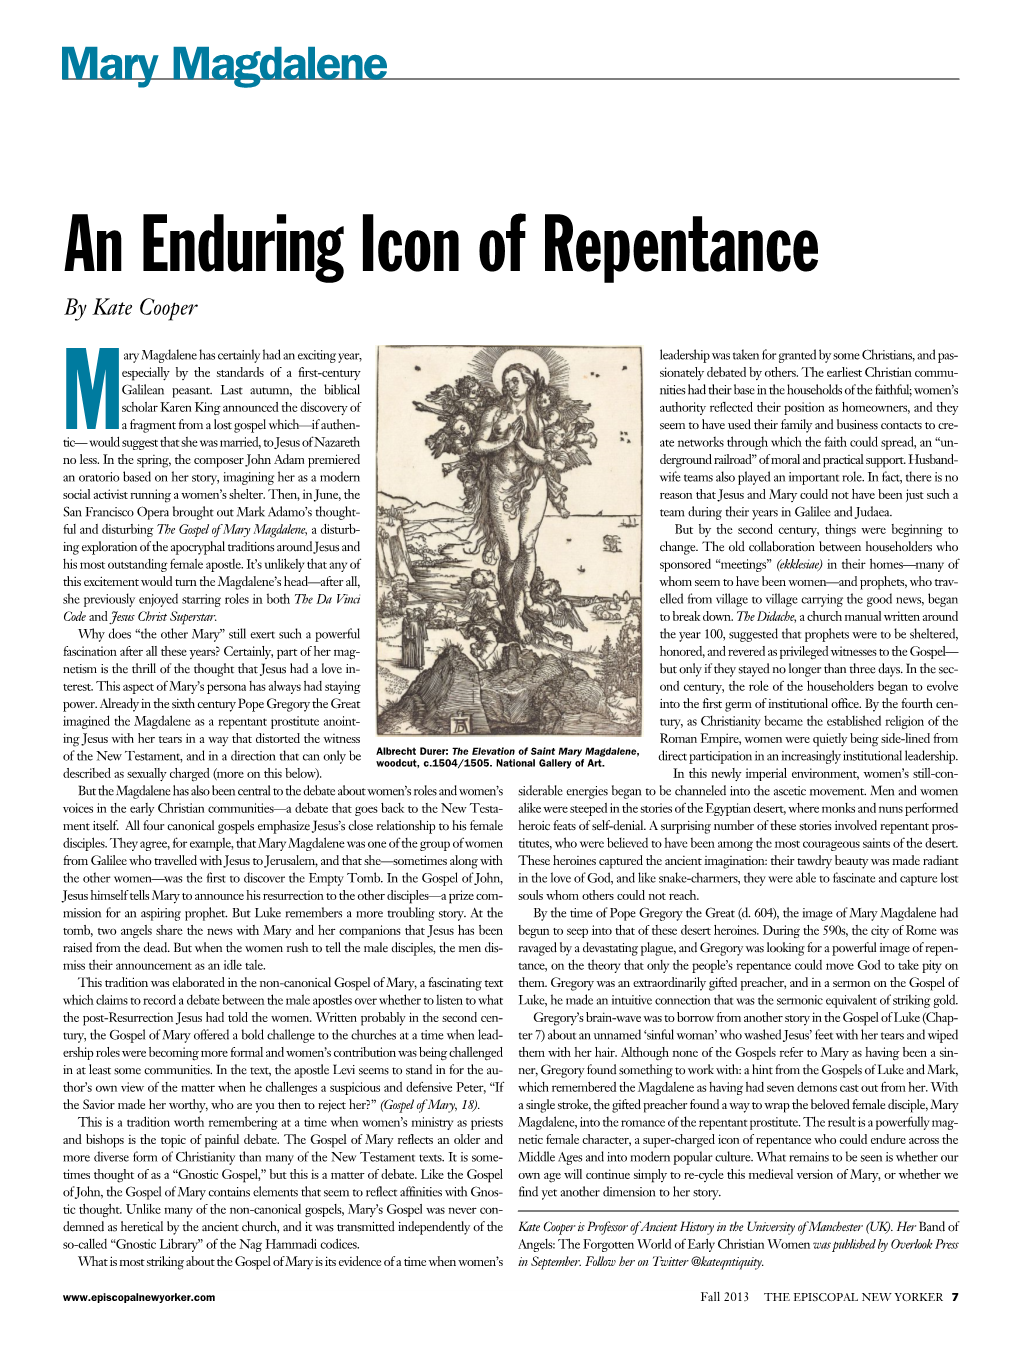 An Enduring Icon of Repentance by Kate Cooper